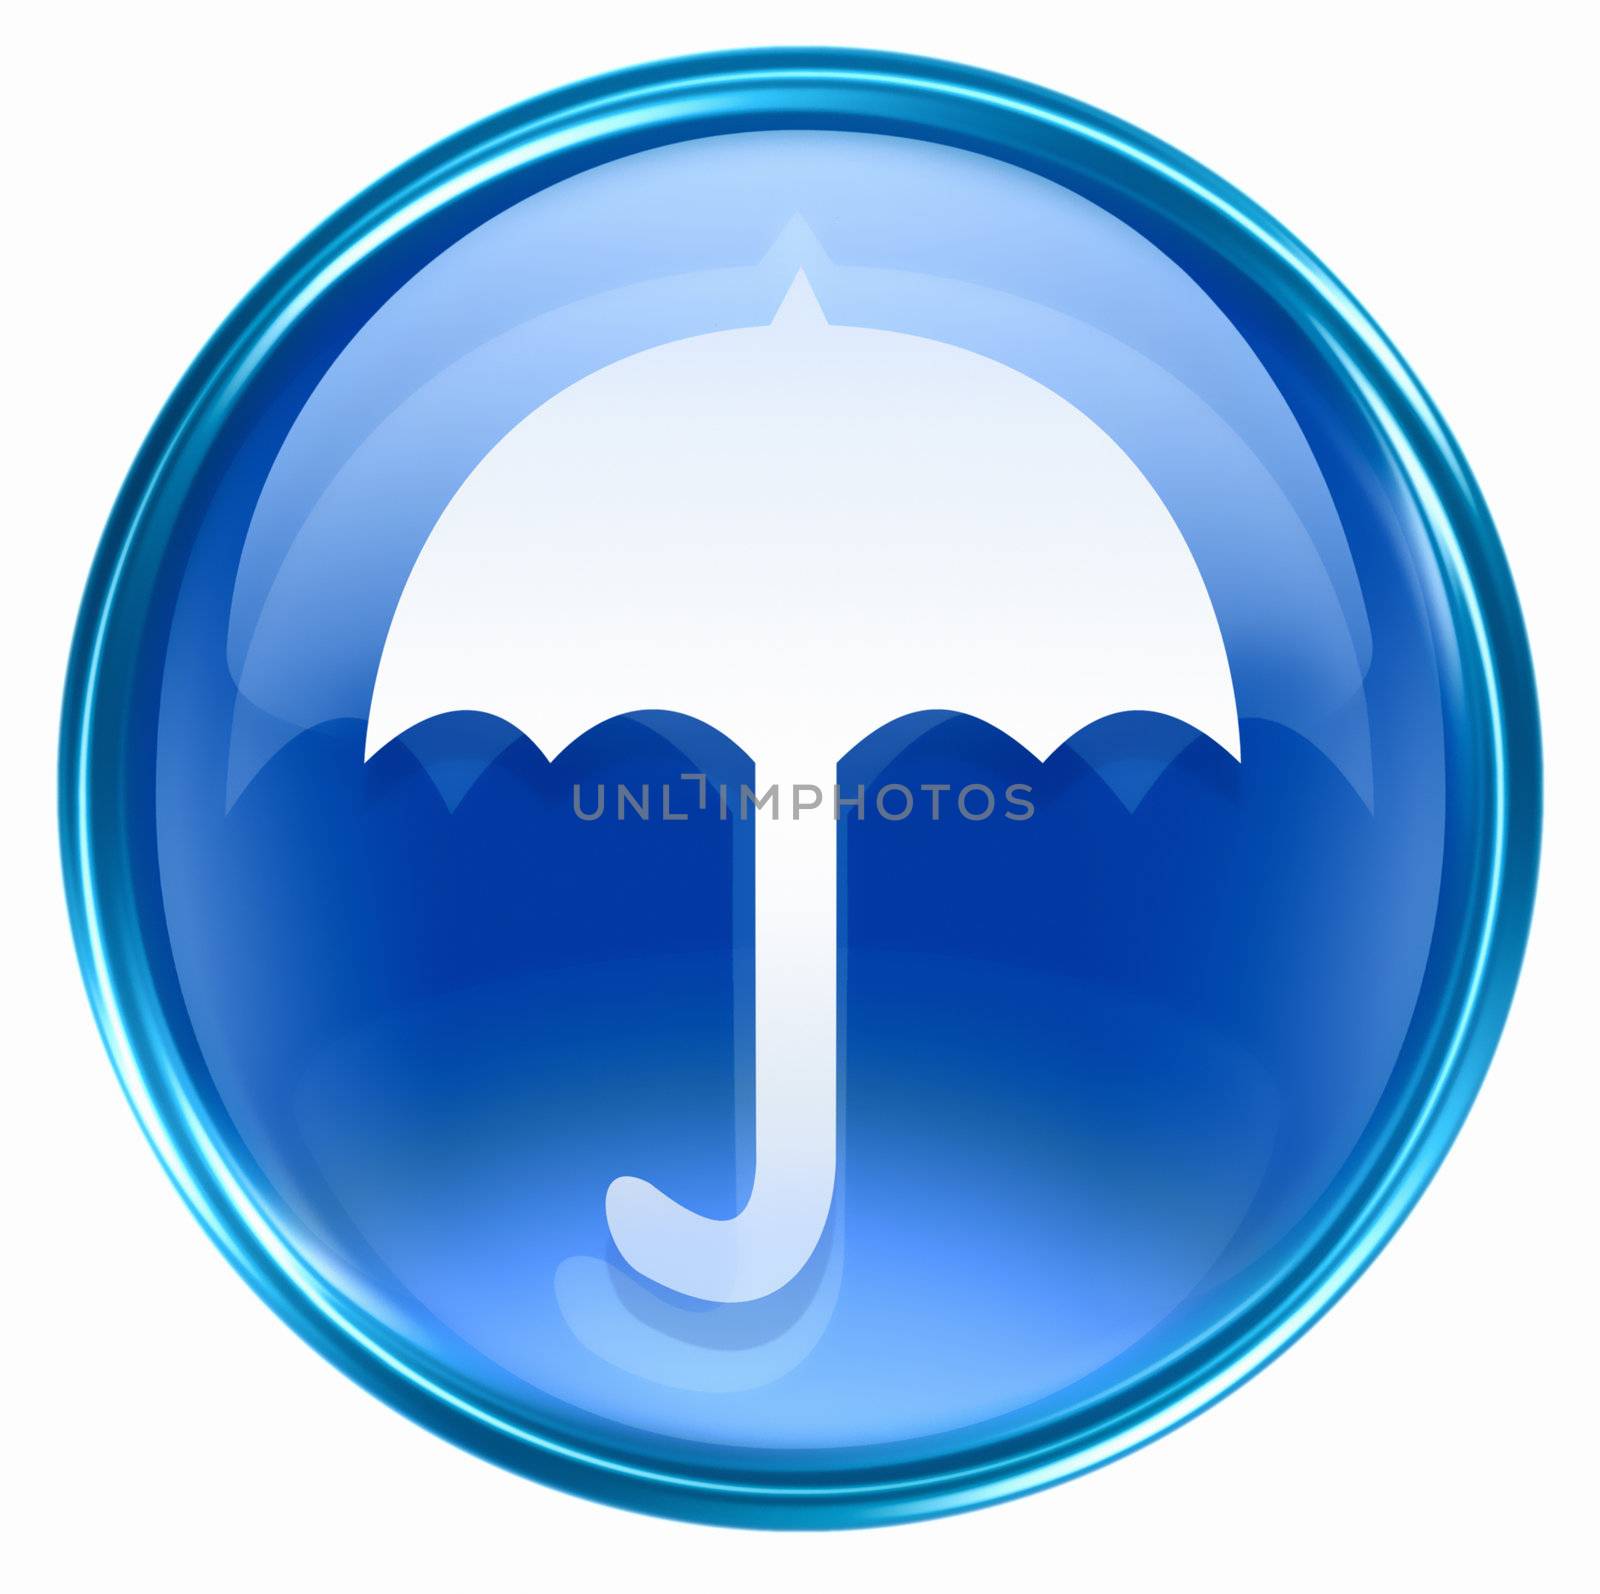 Umbrella icon blue, isolated on white background by zeffss